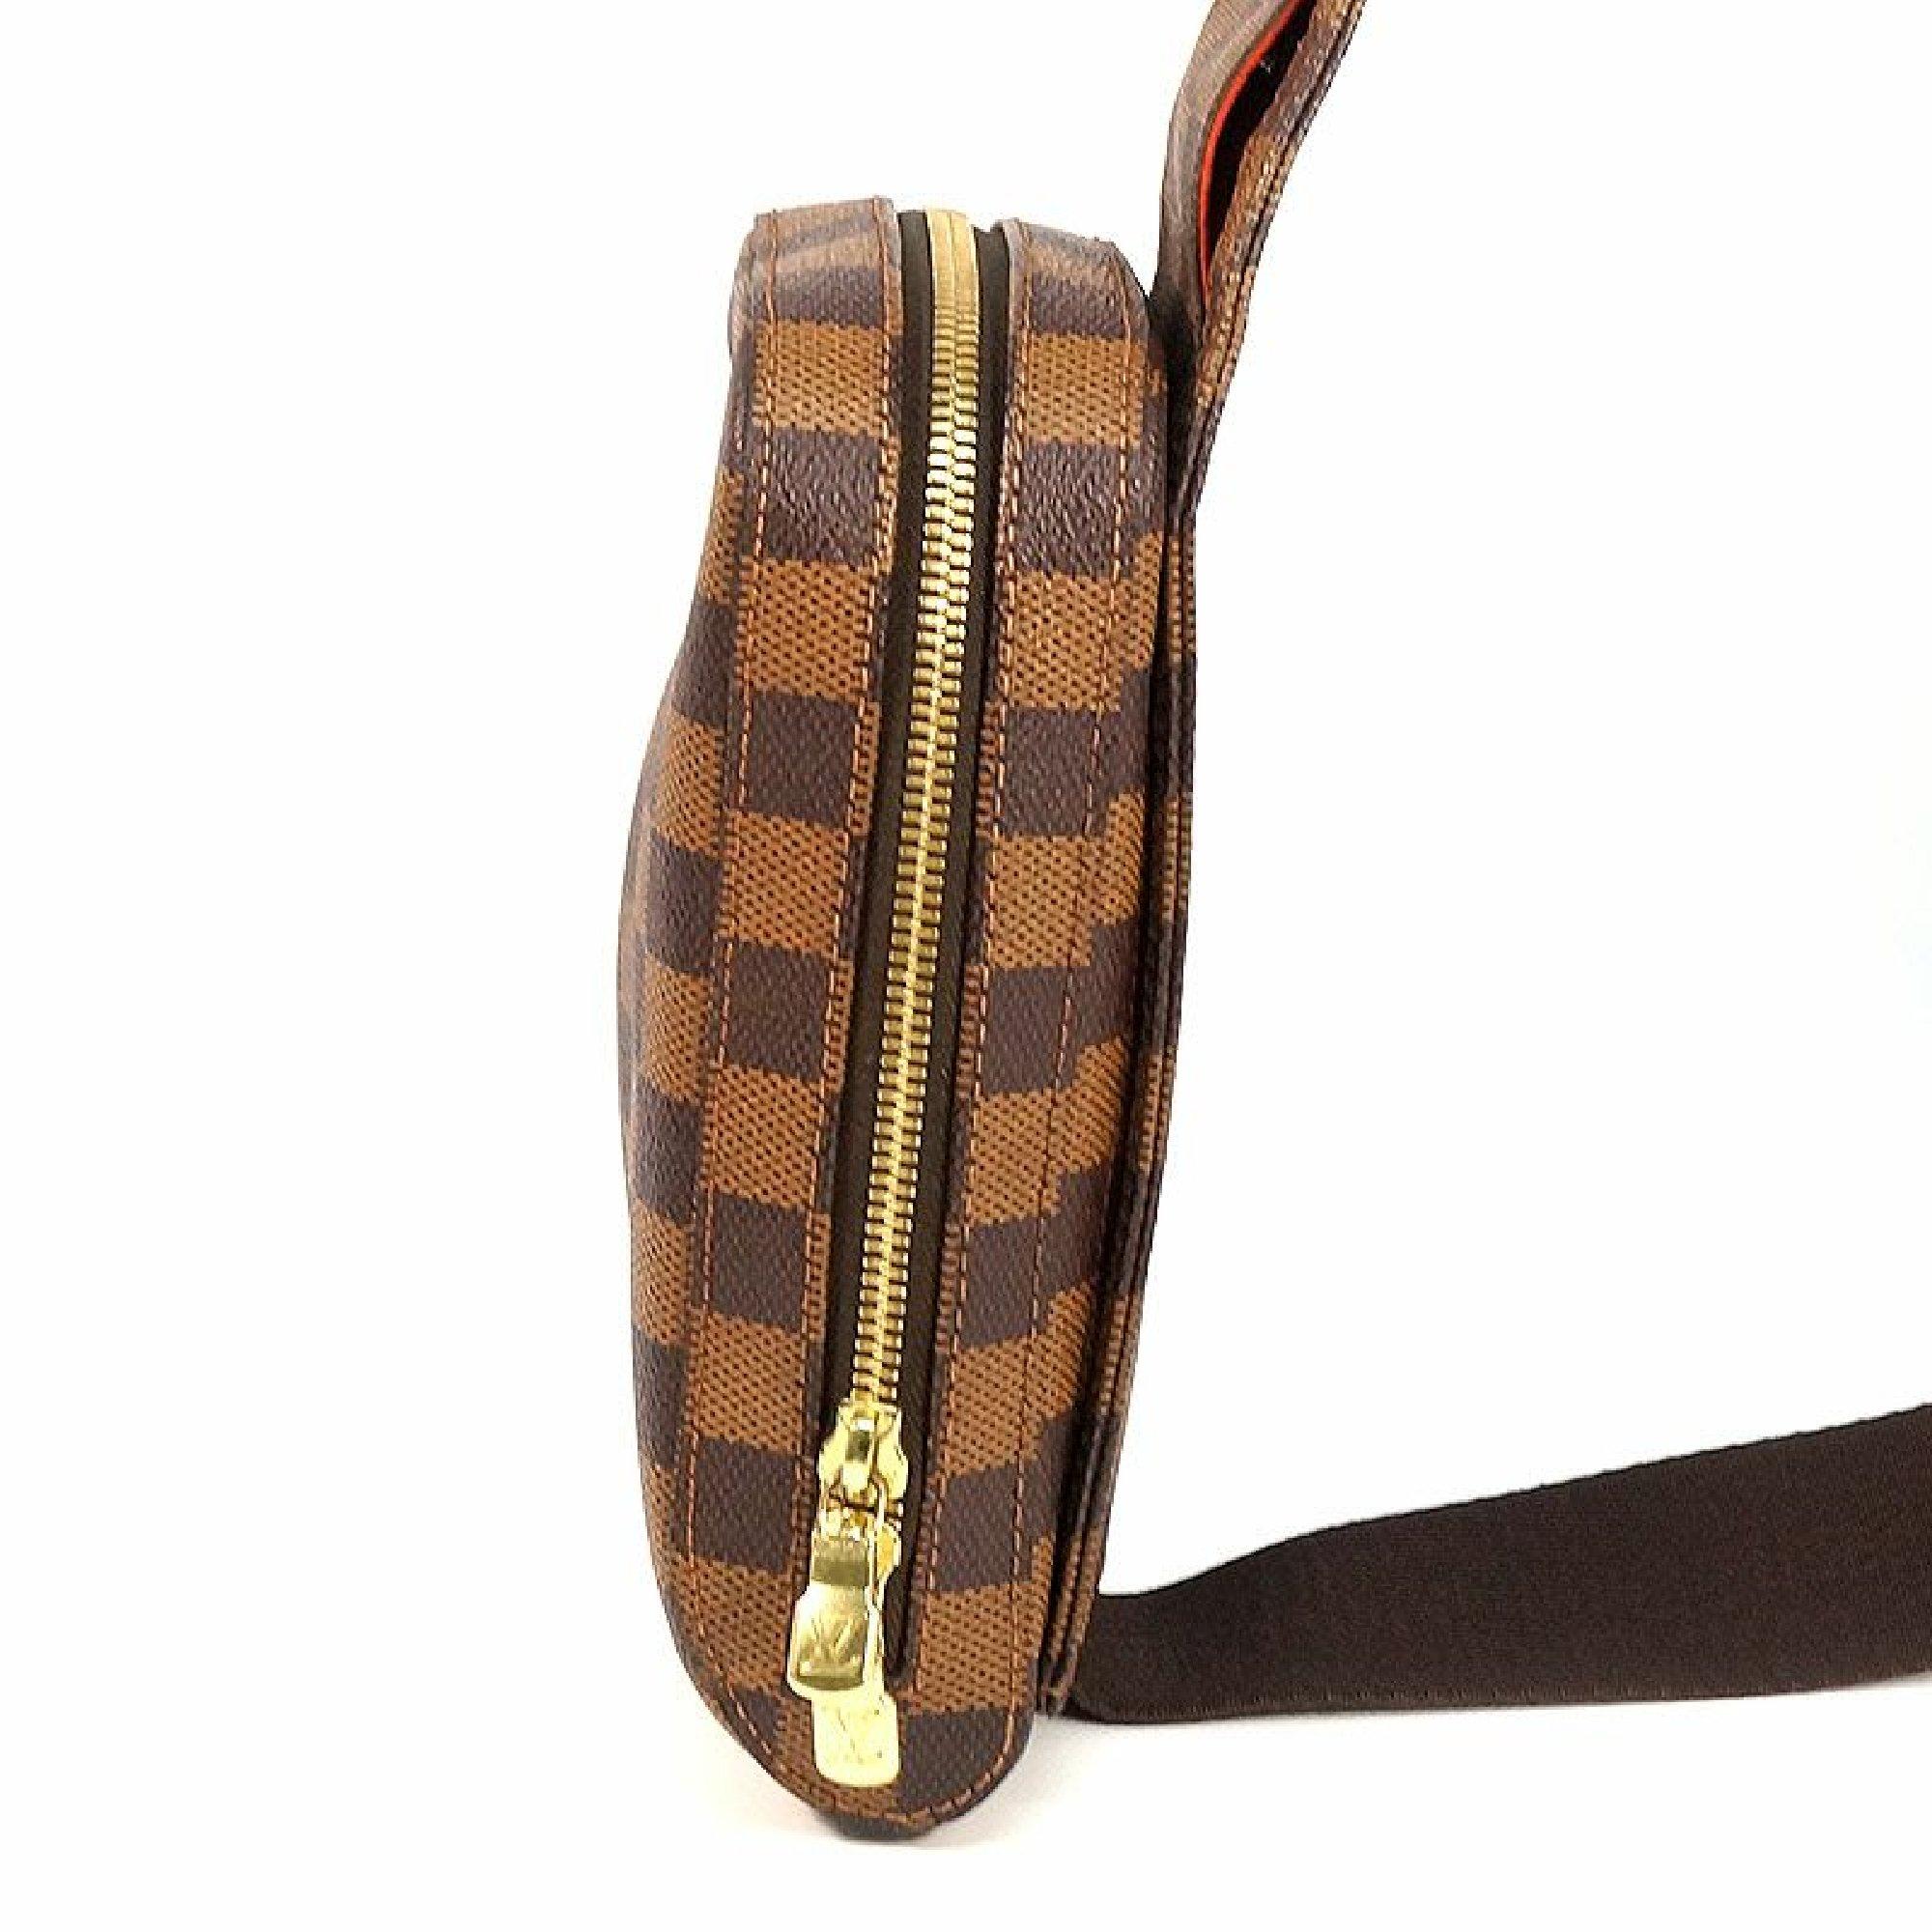 An authentic LOUIS VUITTON Geronimos unisex body bag N51994 Damier ebene. The color is Damier ebene. The outside material is Damier canvas. The pattern is Geronimos. This item is Contemporary. The year of manufacture would be 2003.
Rank
AB signs of